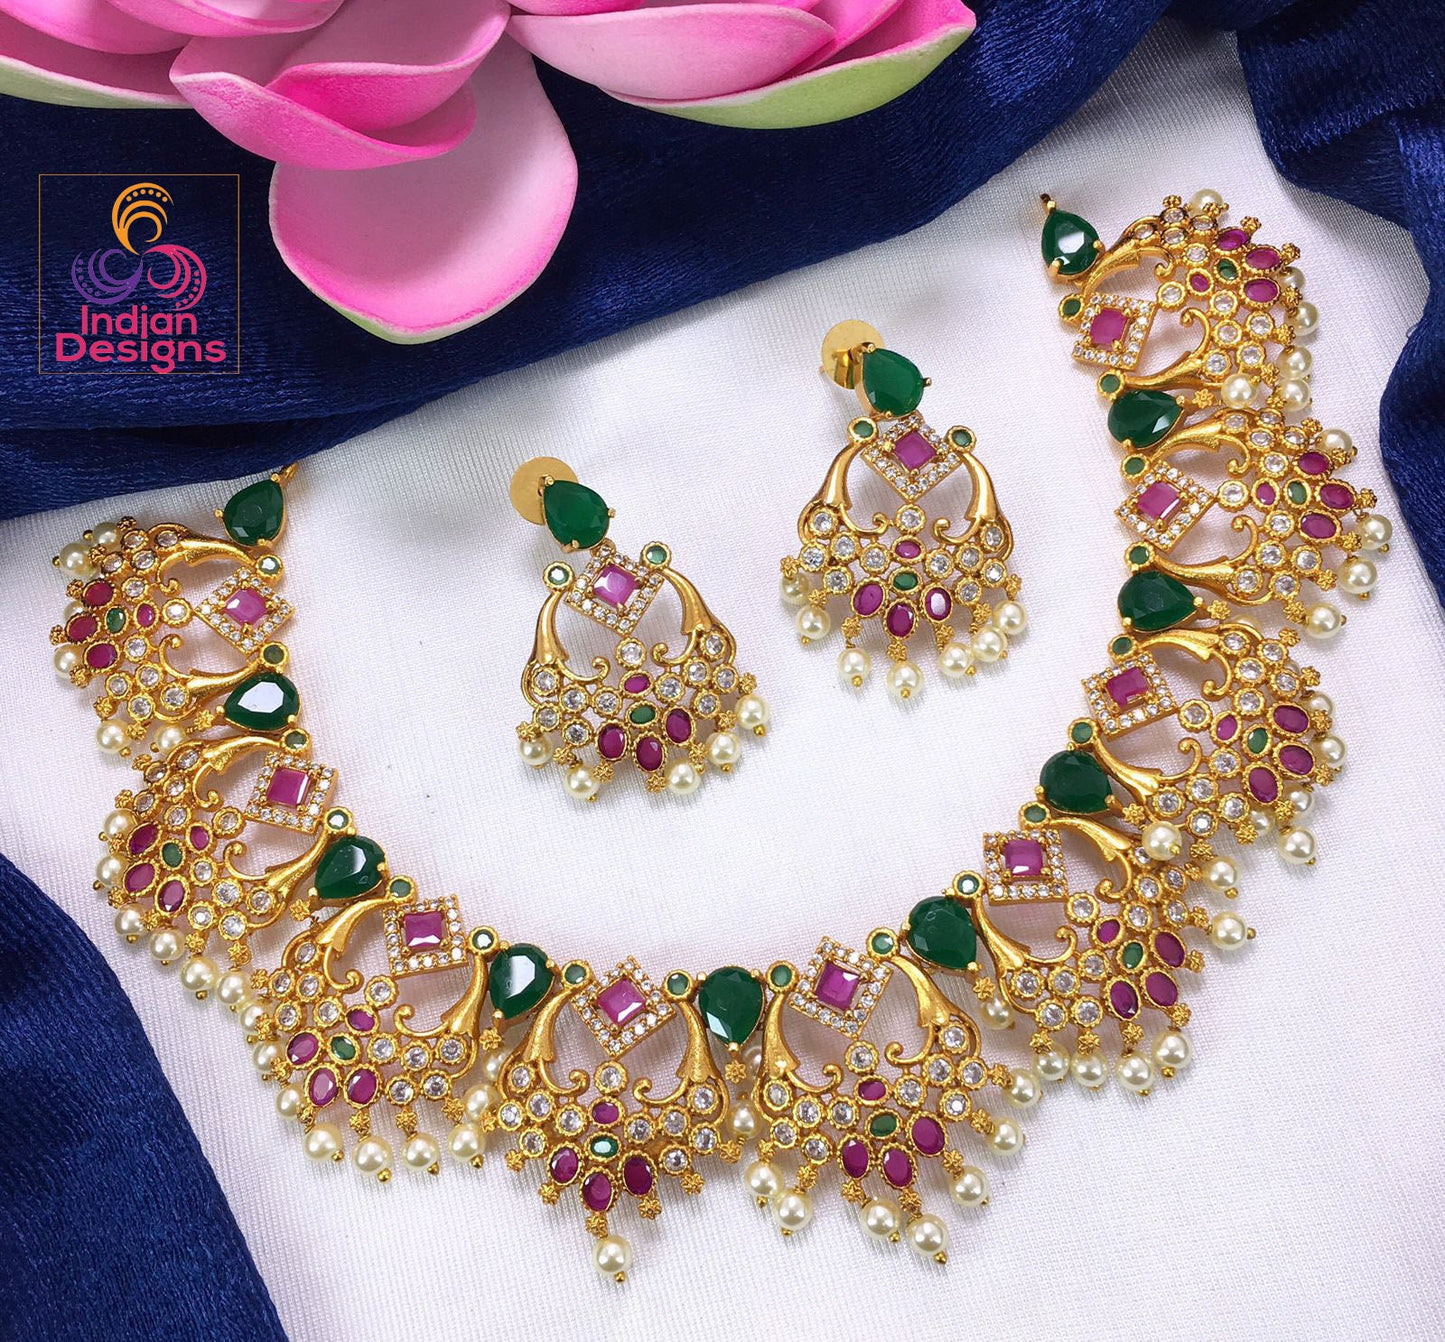 Exclusive Real Kemp stone South Indian Necklace |Matte Gold plated Crescent Moon Ruby green and Diamond stones South Indian Wedding Necklace